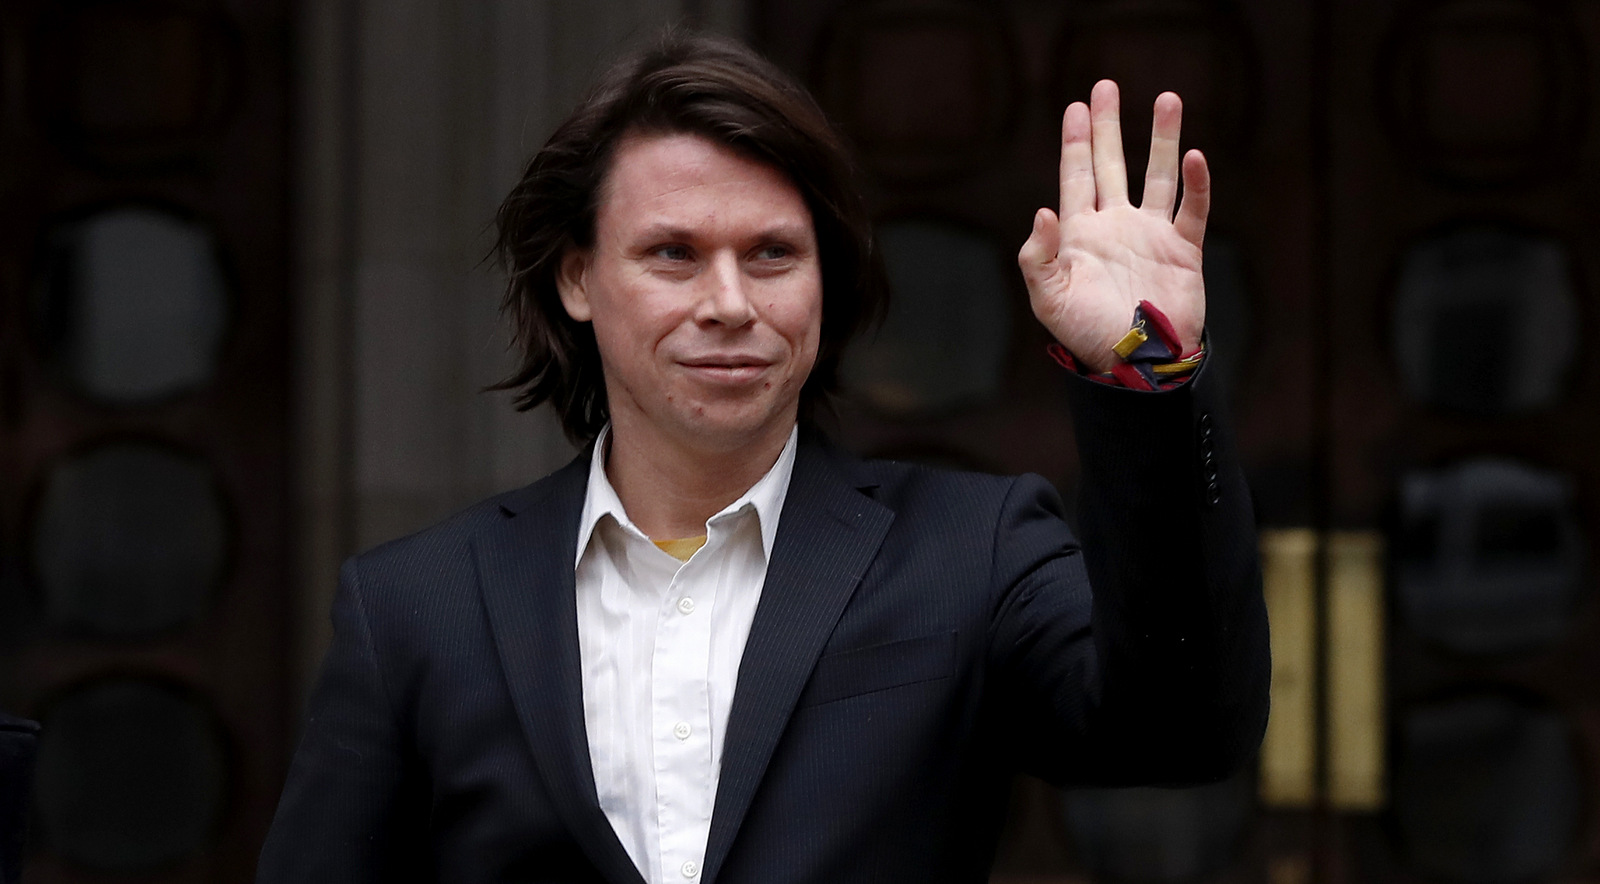 Lauri Love waves to supporters outside The Royal Courts of Justice in London, Monday, Feb. 5, 2018. The ruling in Lauri Love's appeal against extradition to the United States, where he faces solitary confinement and a potential 99 year prison sentence, will be handed down on Monday Feb. 5 at the Royal Courts of Justice. (AP Photo/Kirsty Wigglesworth)